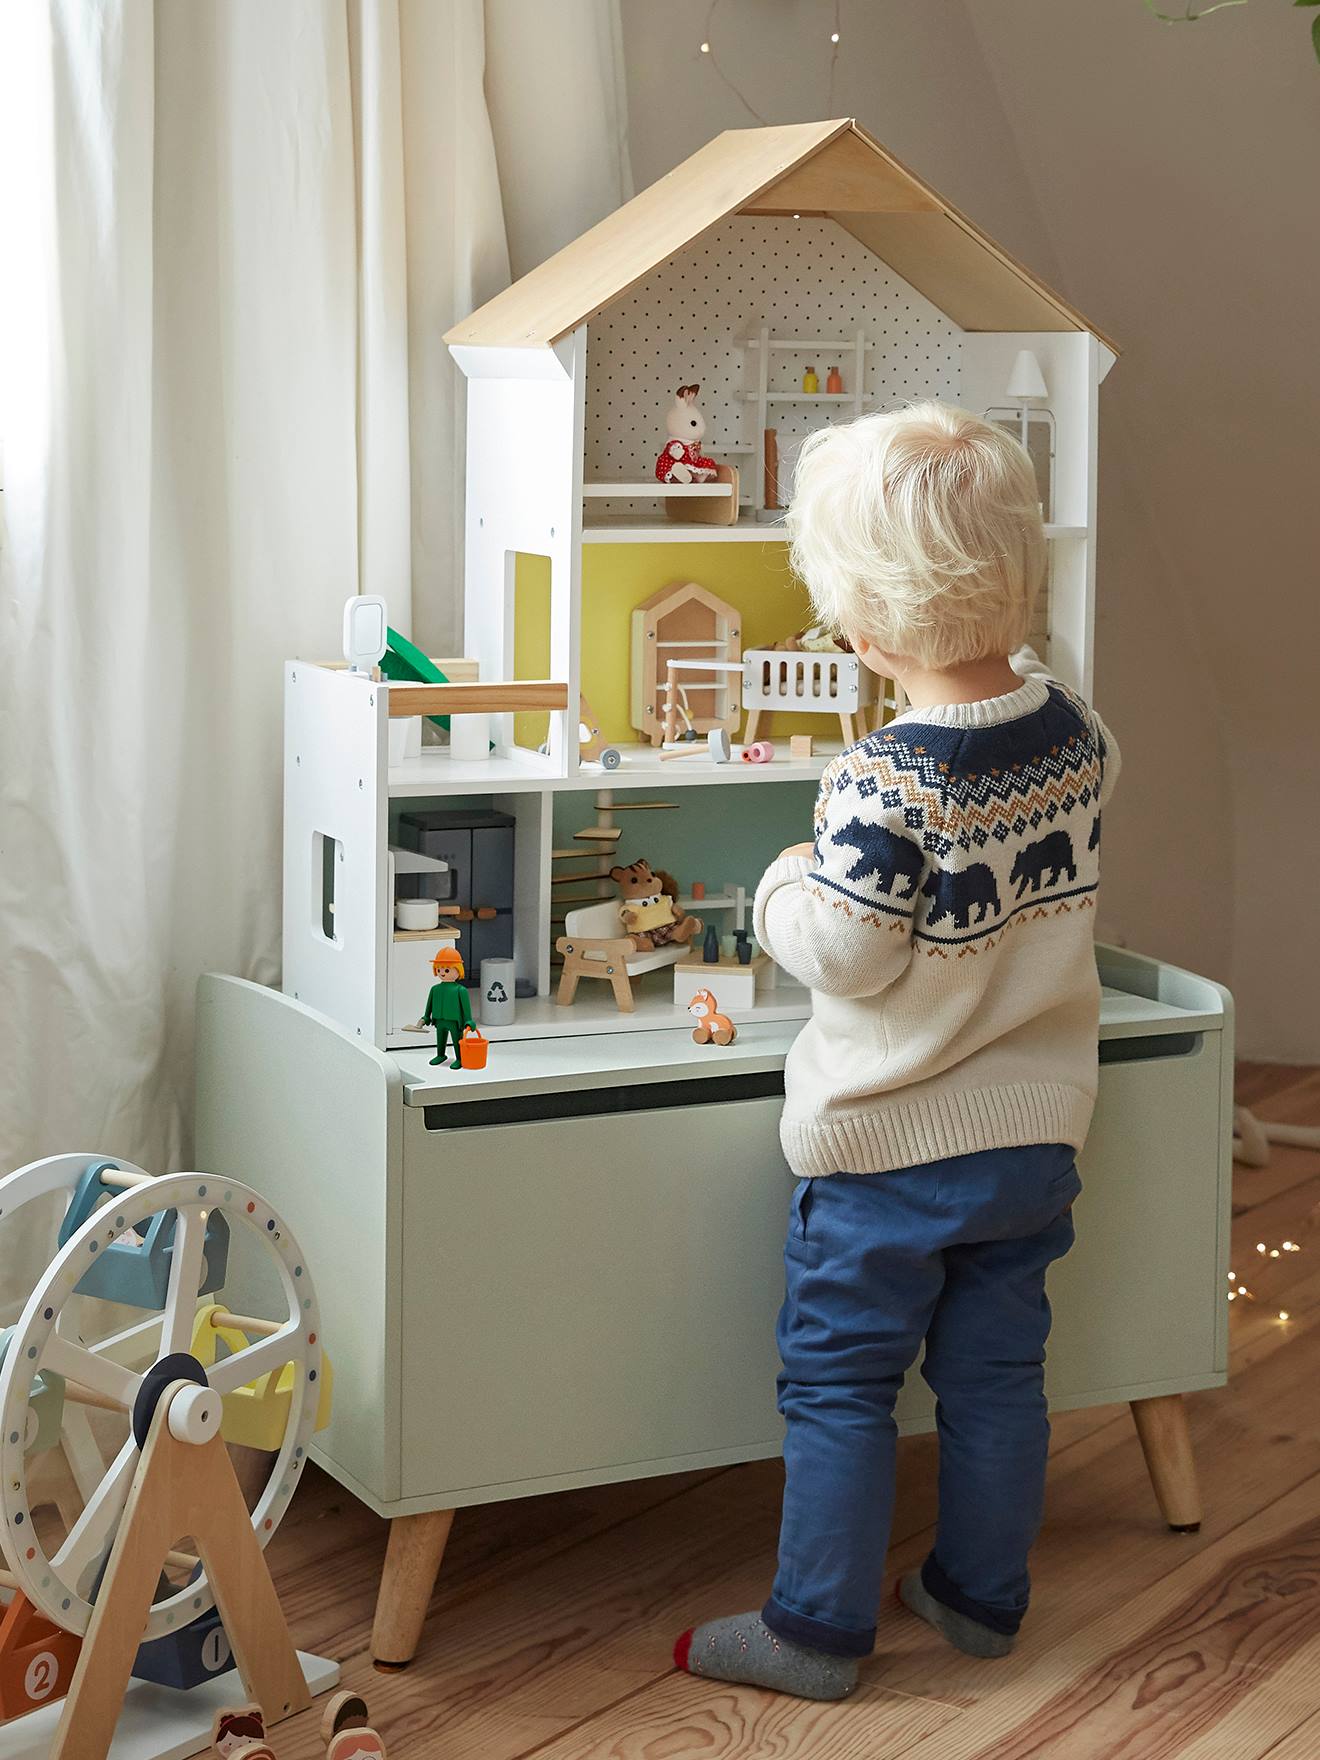 Dolls' House for Their Friends - Wood FSC® Certified - white, Toys | Vertbaudet